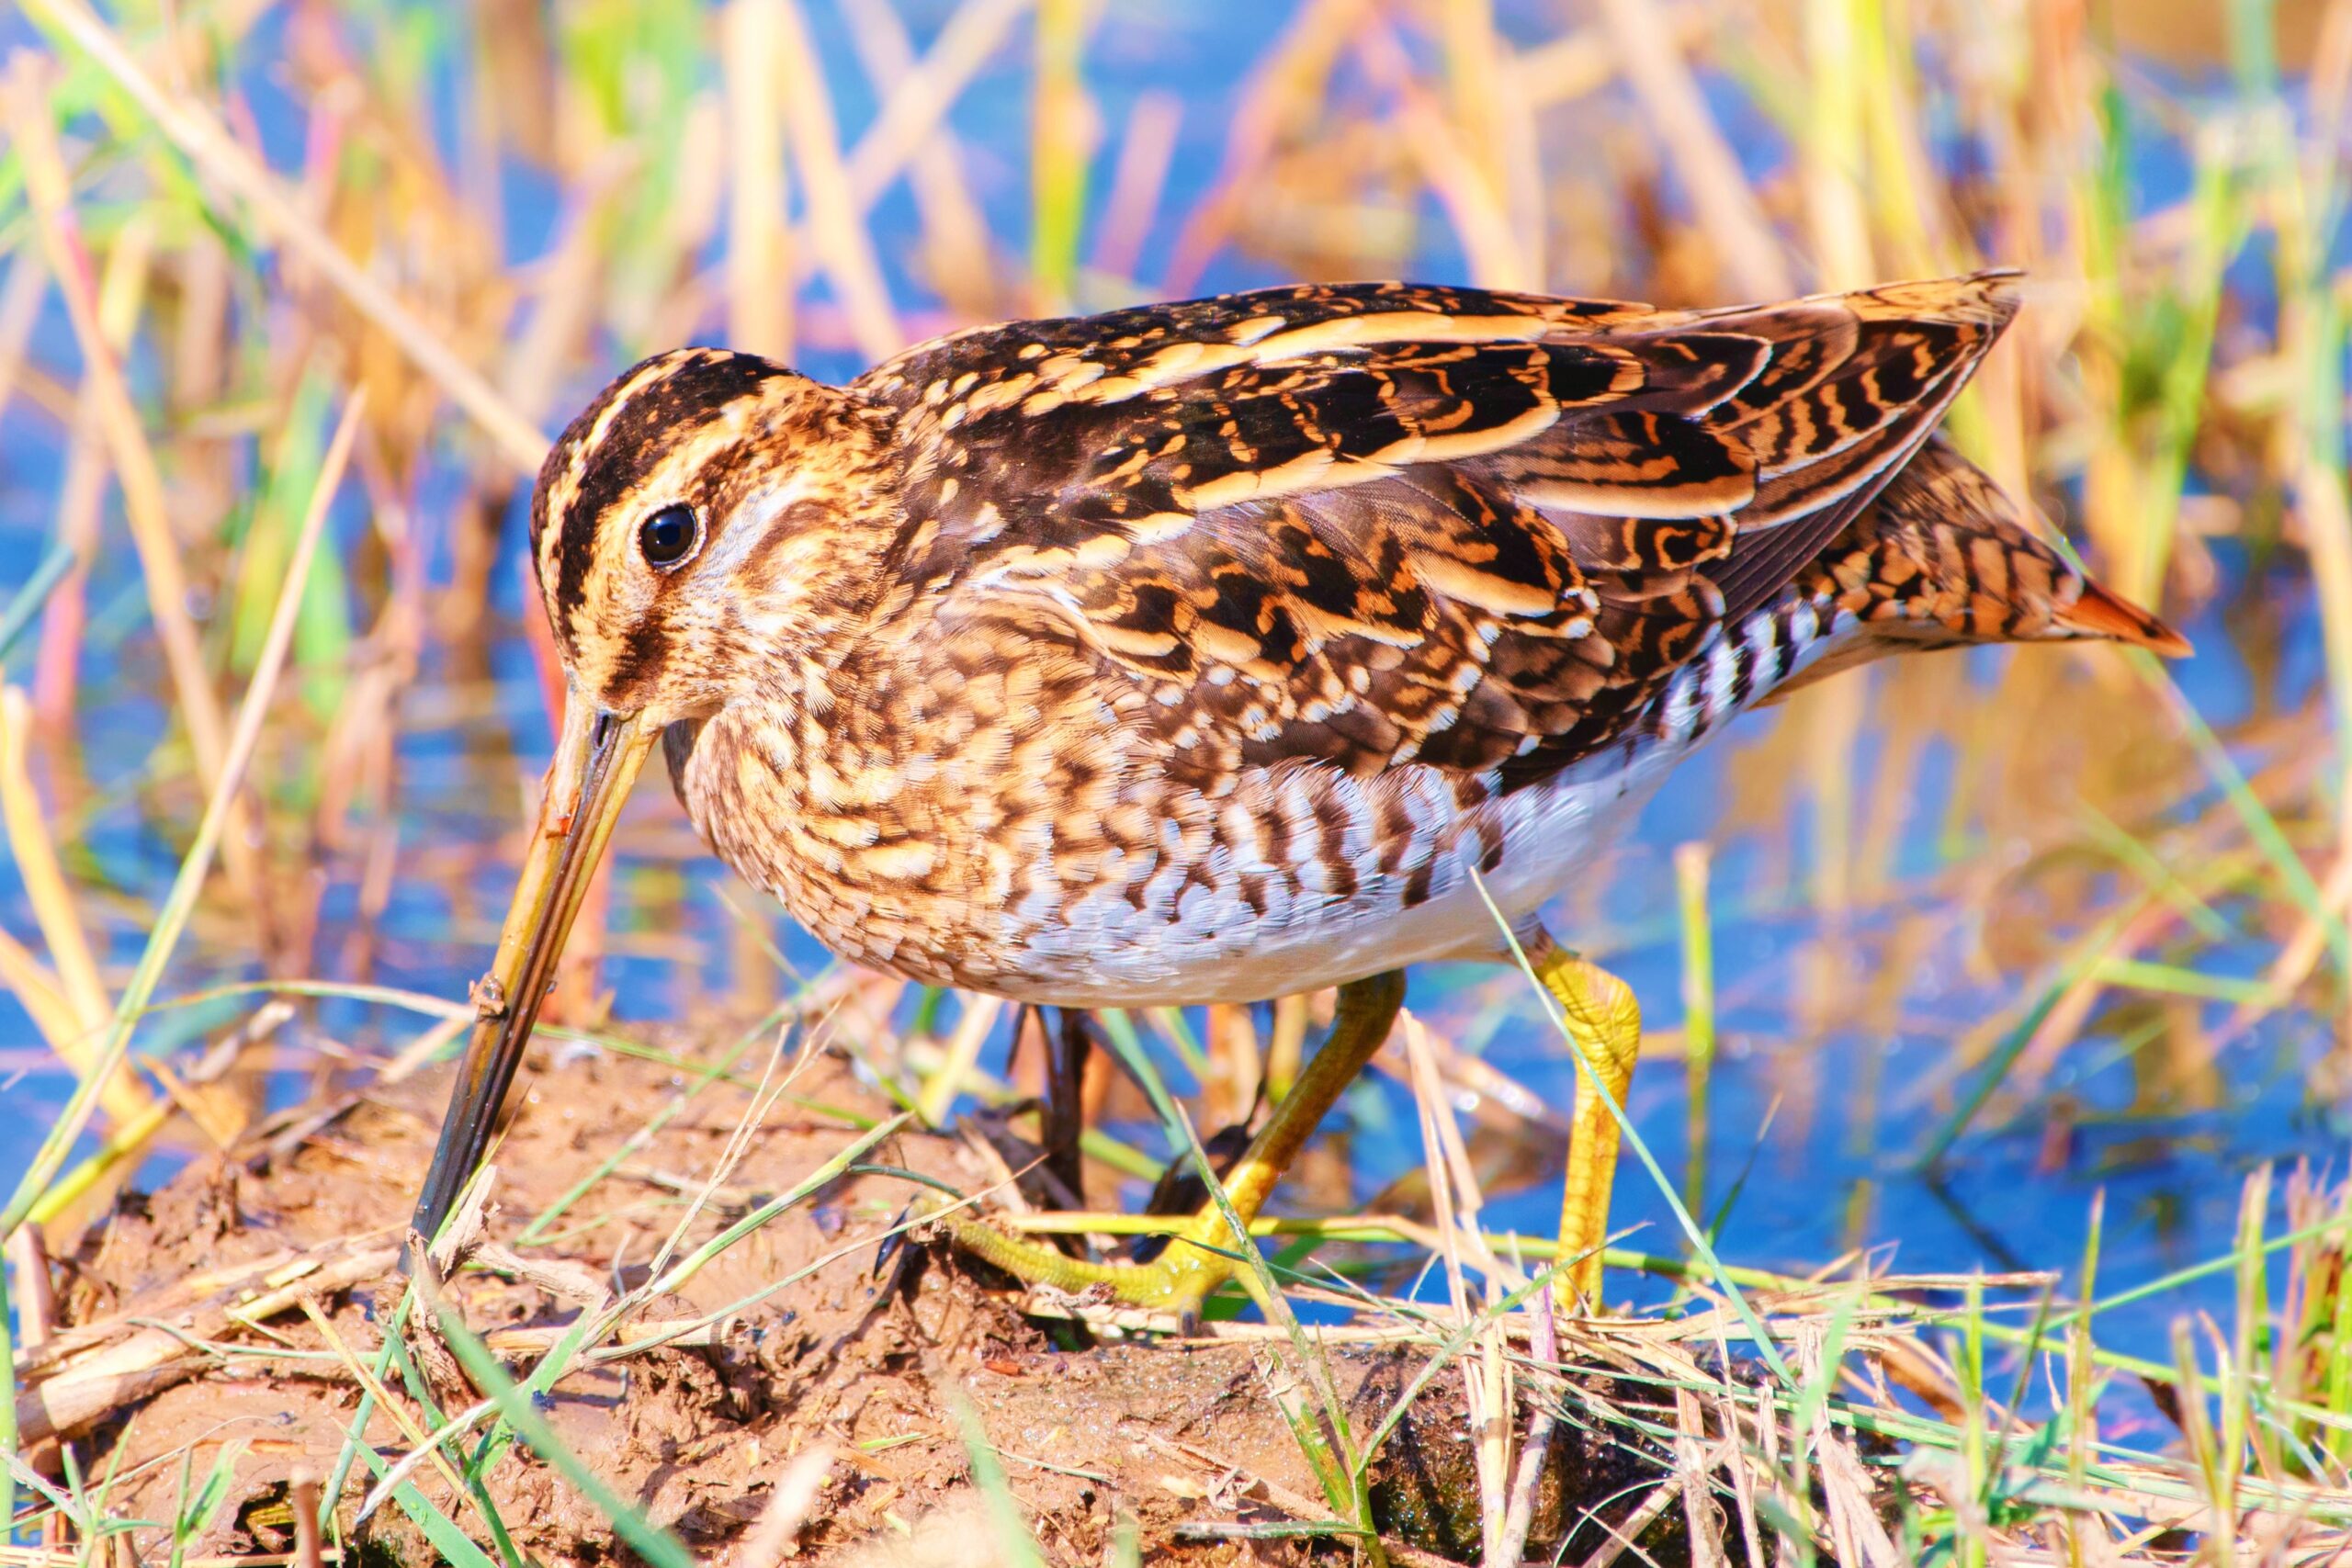 <img src="common.jpg" alt="common snipe bird at cley marshes"/>